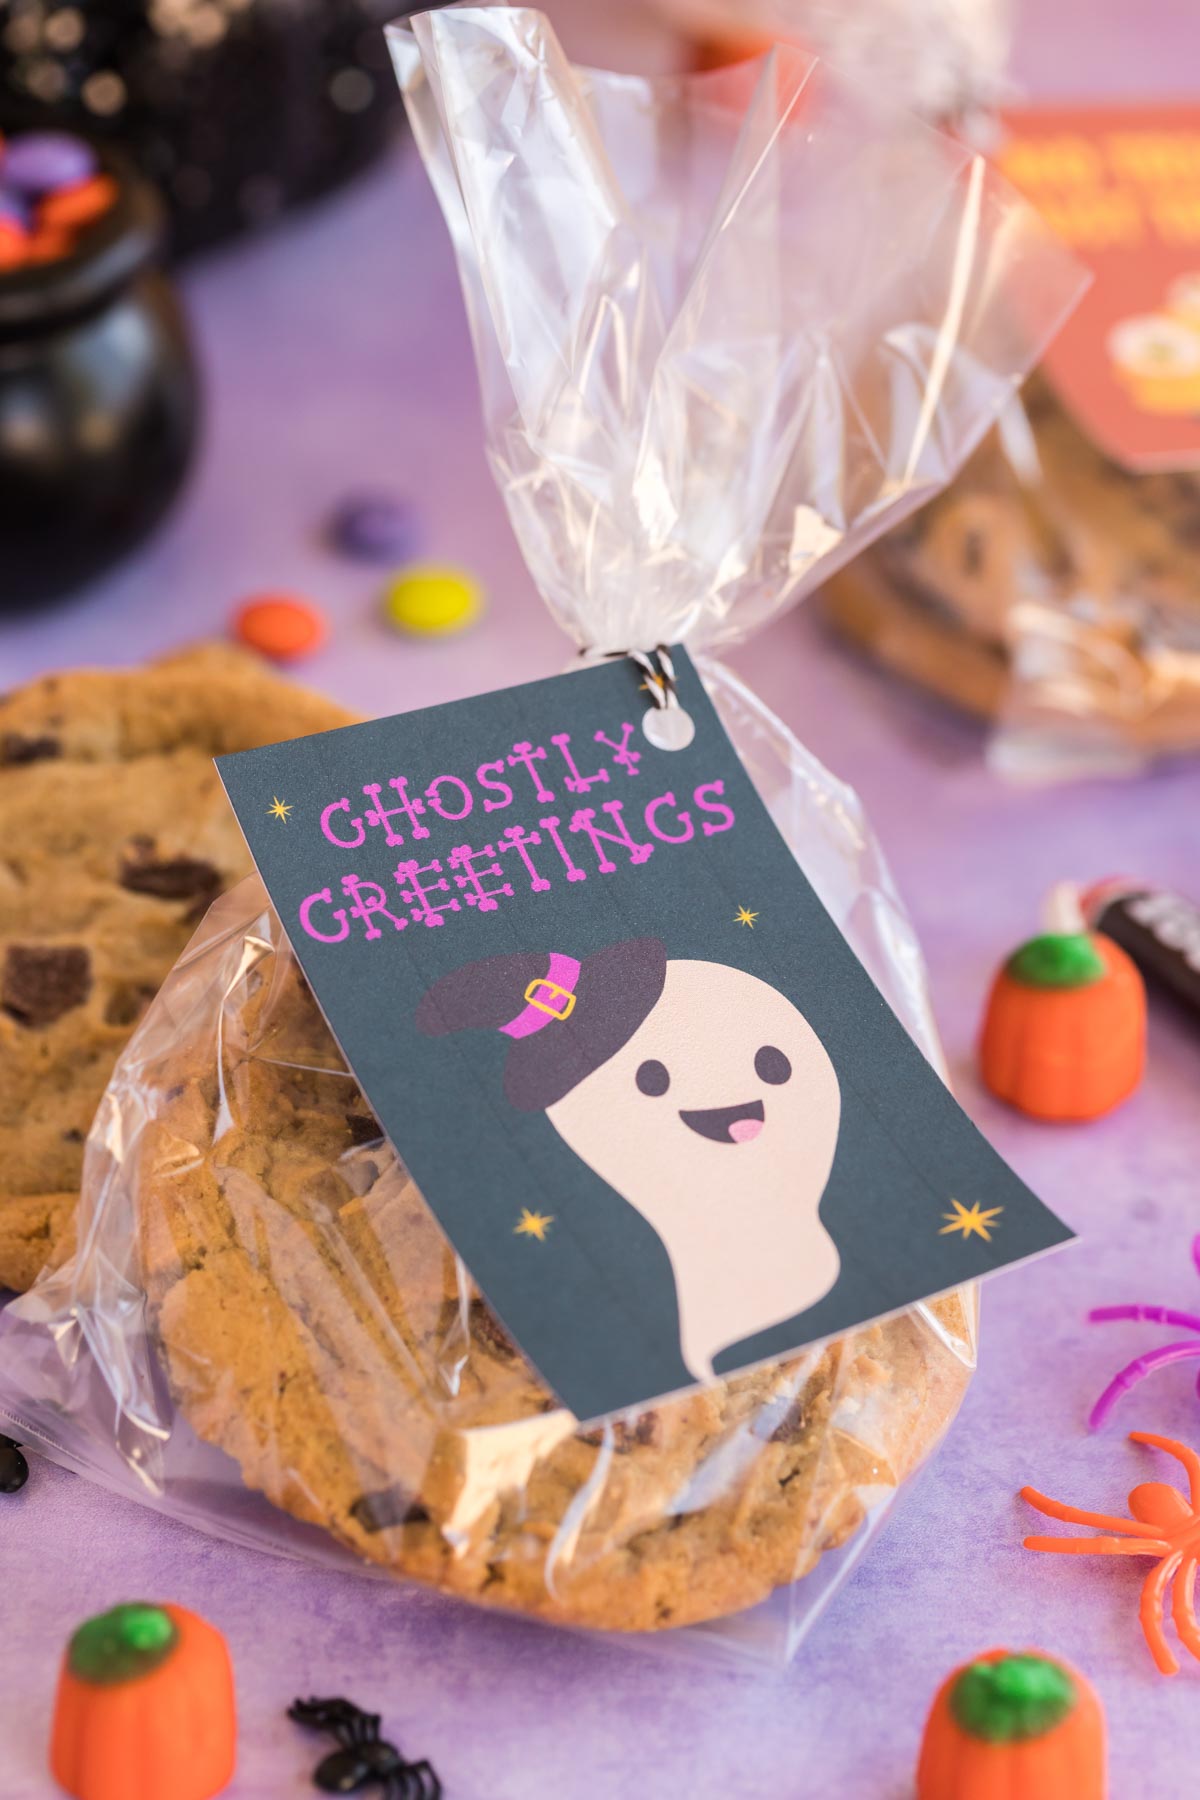 bag of treats with a ghostly greetings gift tag